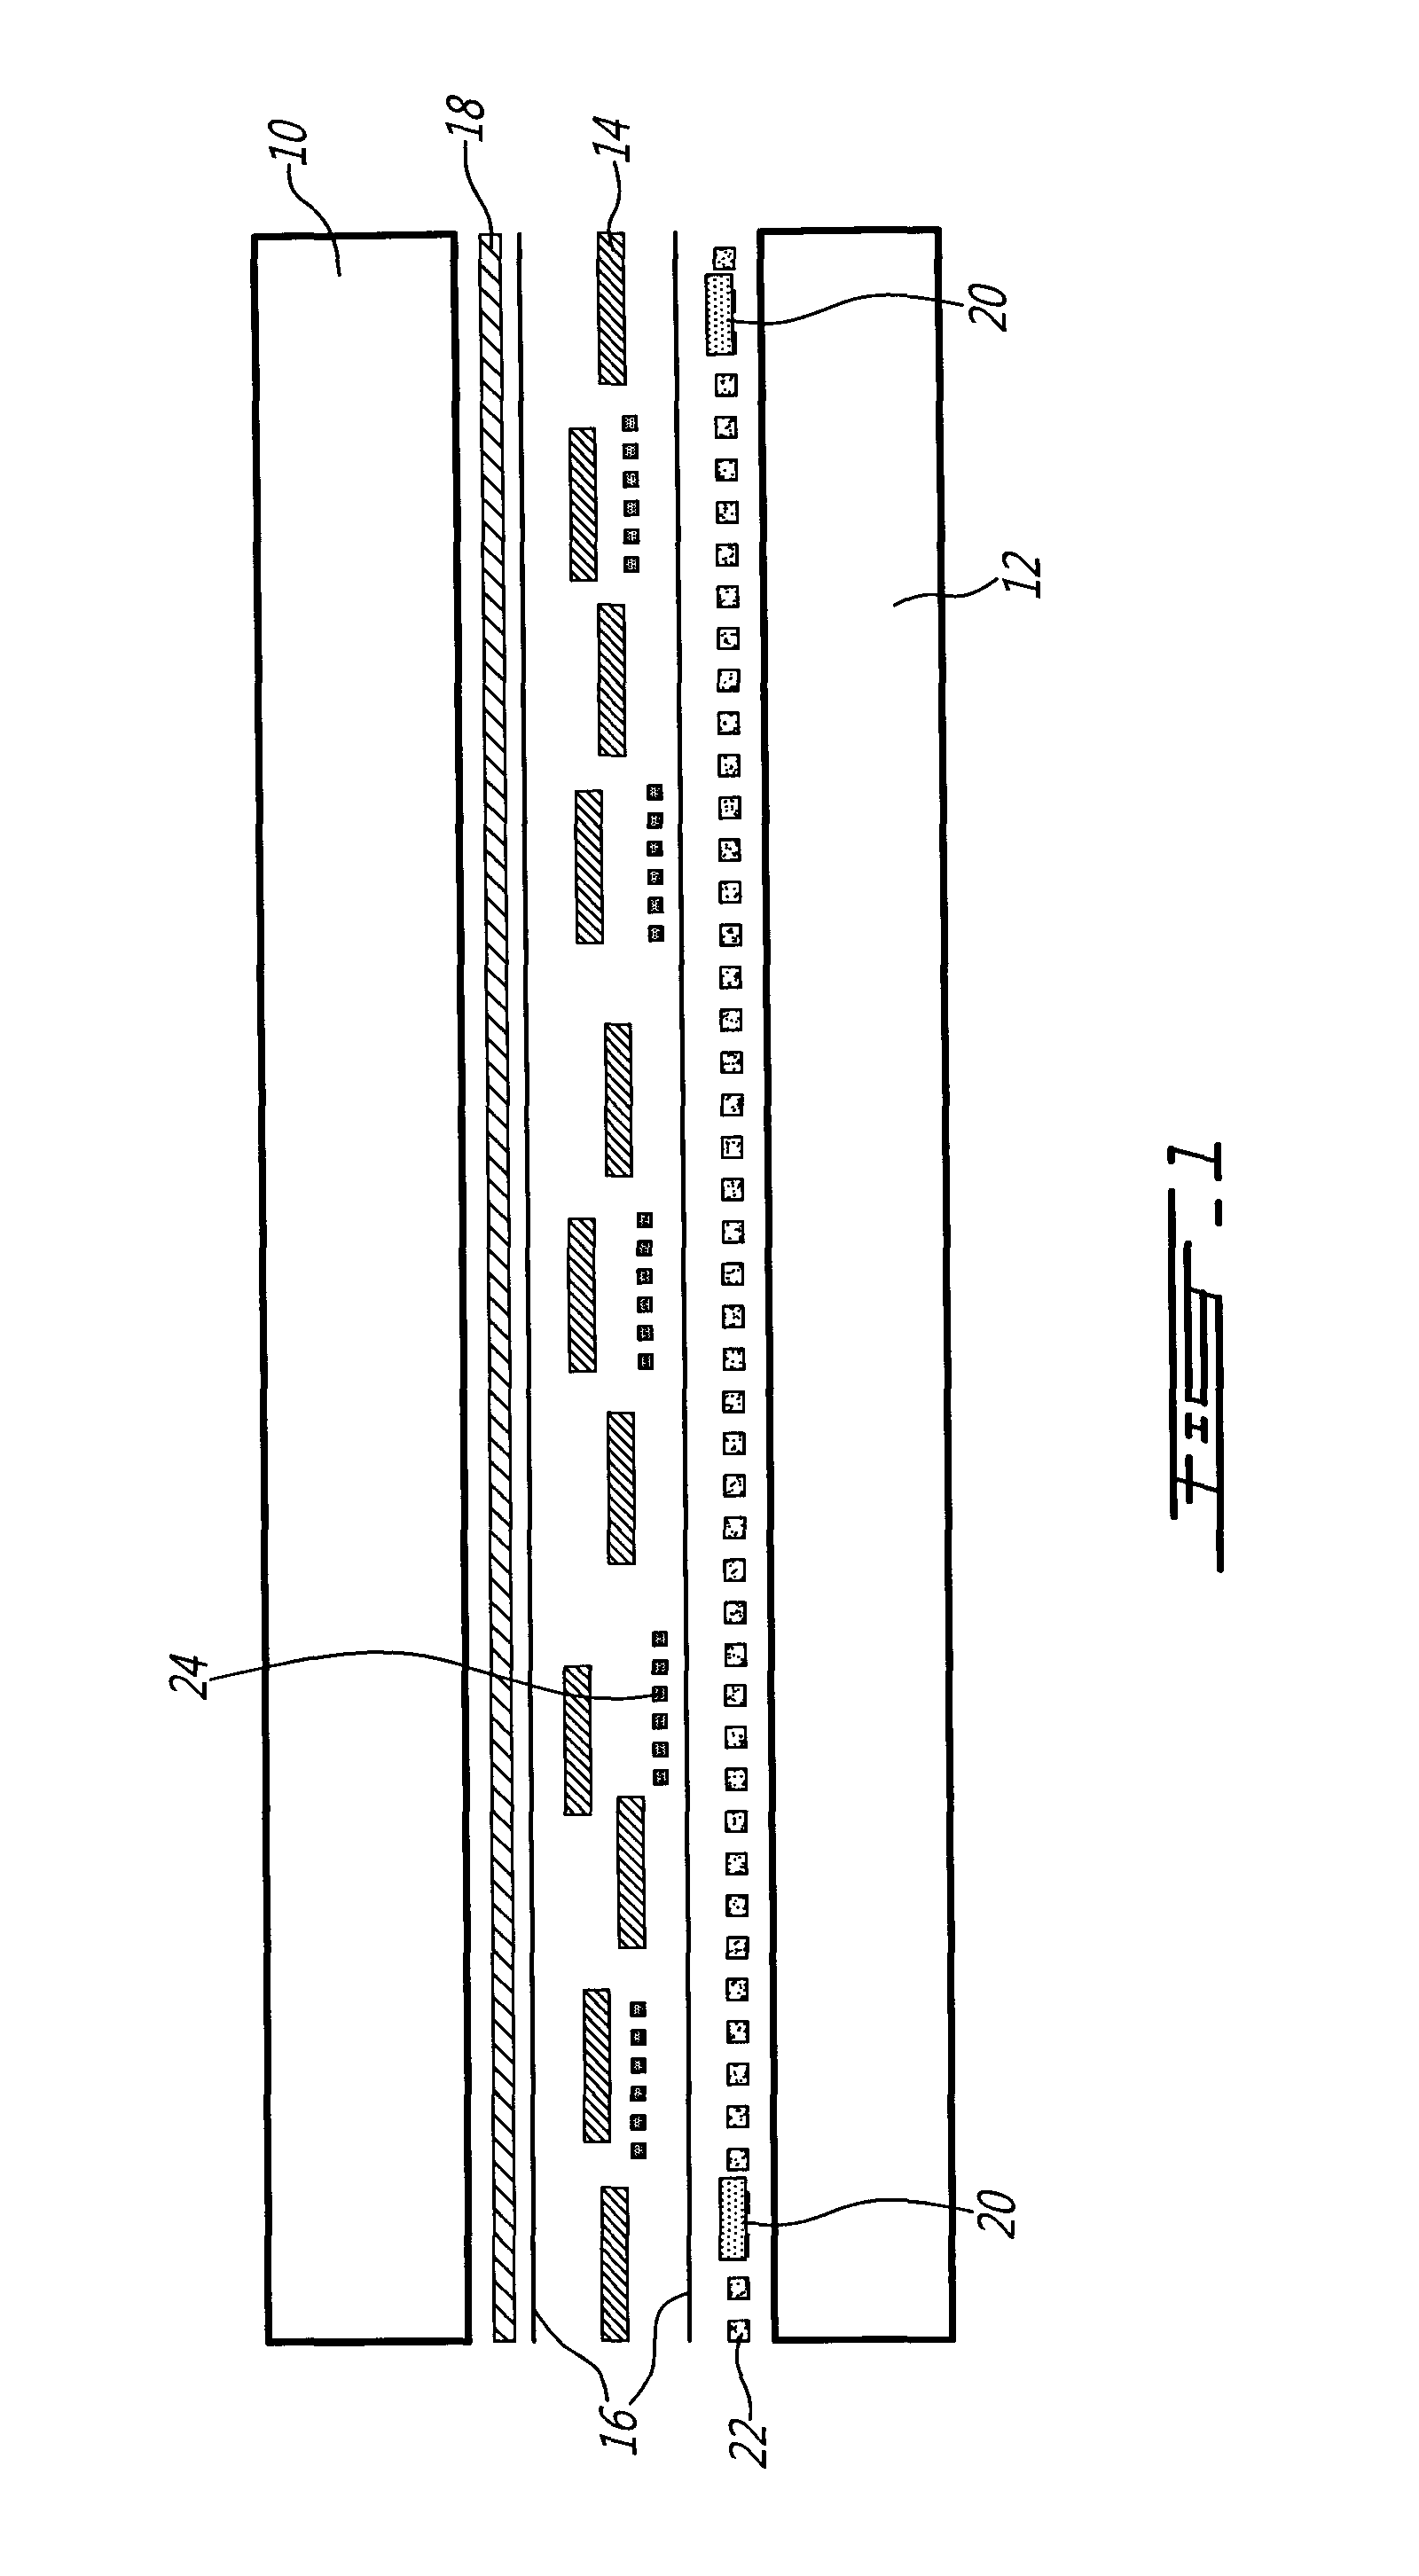 Apparatus and Method for Dynamically Controlling Light Transmission